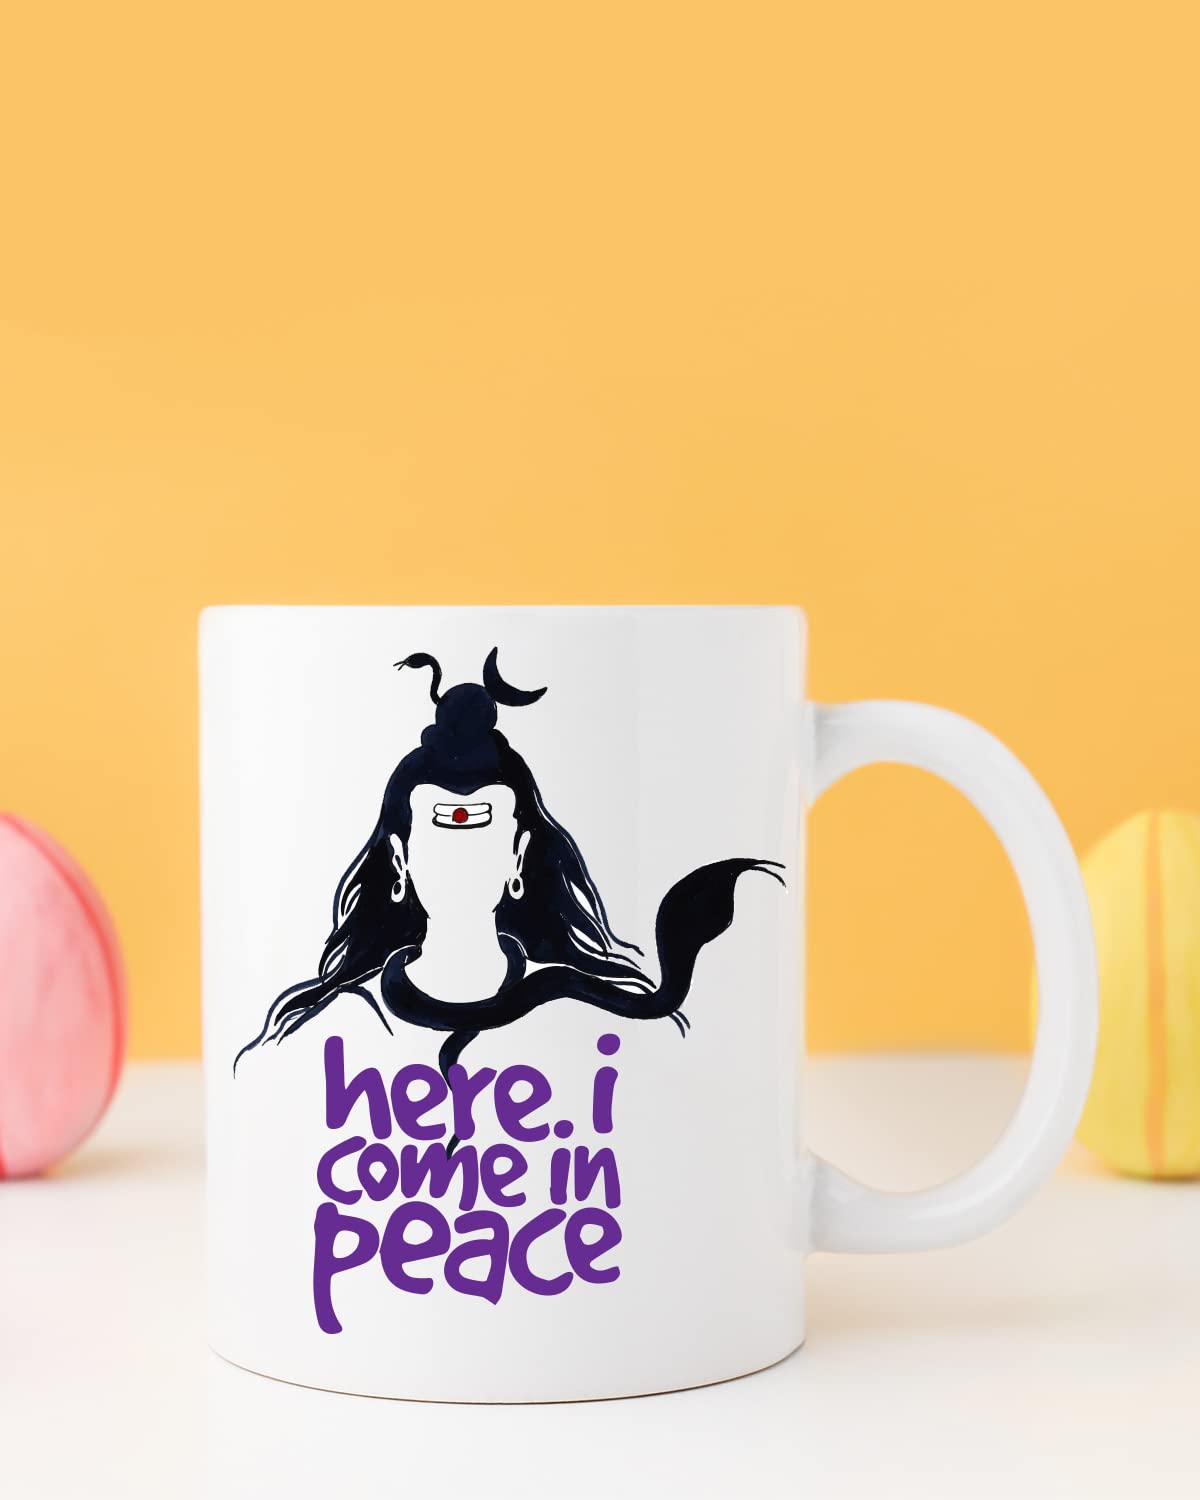 Peace Coffee Mug - Birthday Gift, Motivational Mug, Printed with Inspiring Quotes, Positivity Mug, Inspirational Gift for Him & Her, Best Friend Gift, Gifts for Her, Cheer Up Gift